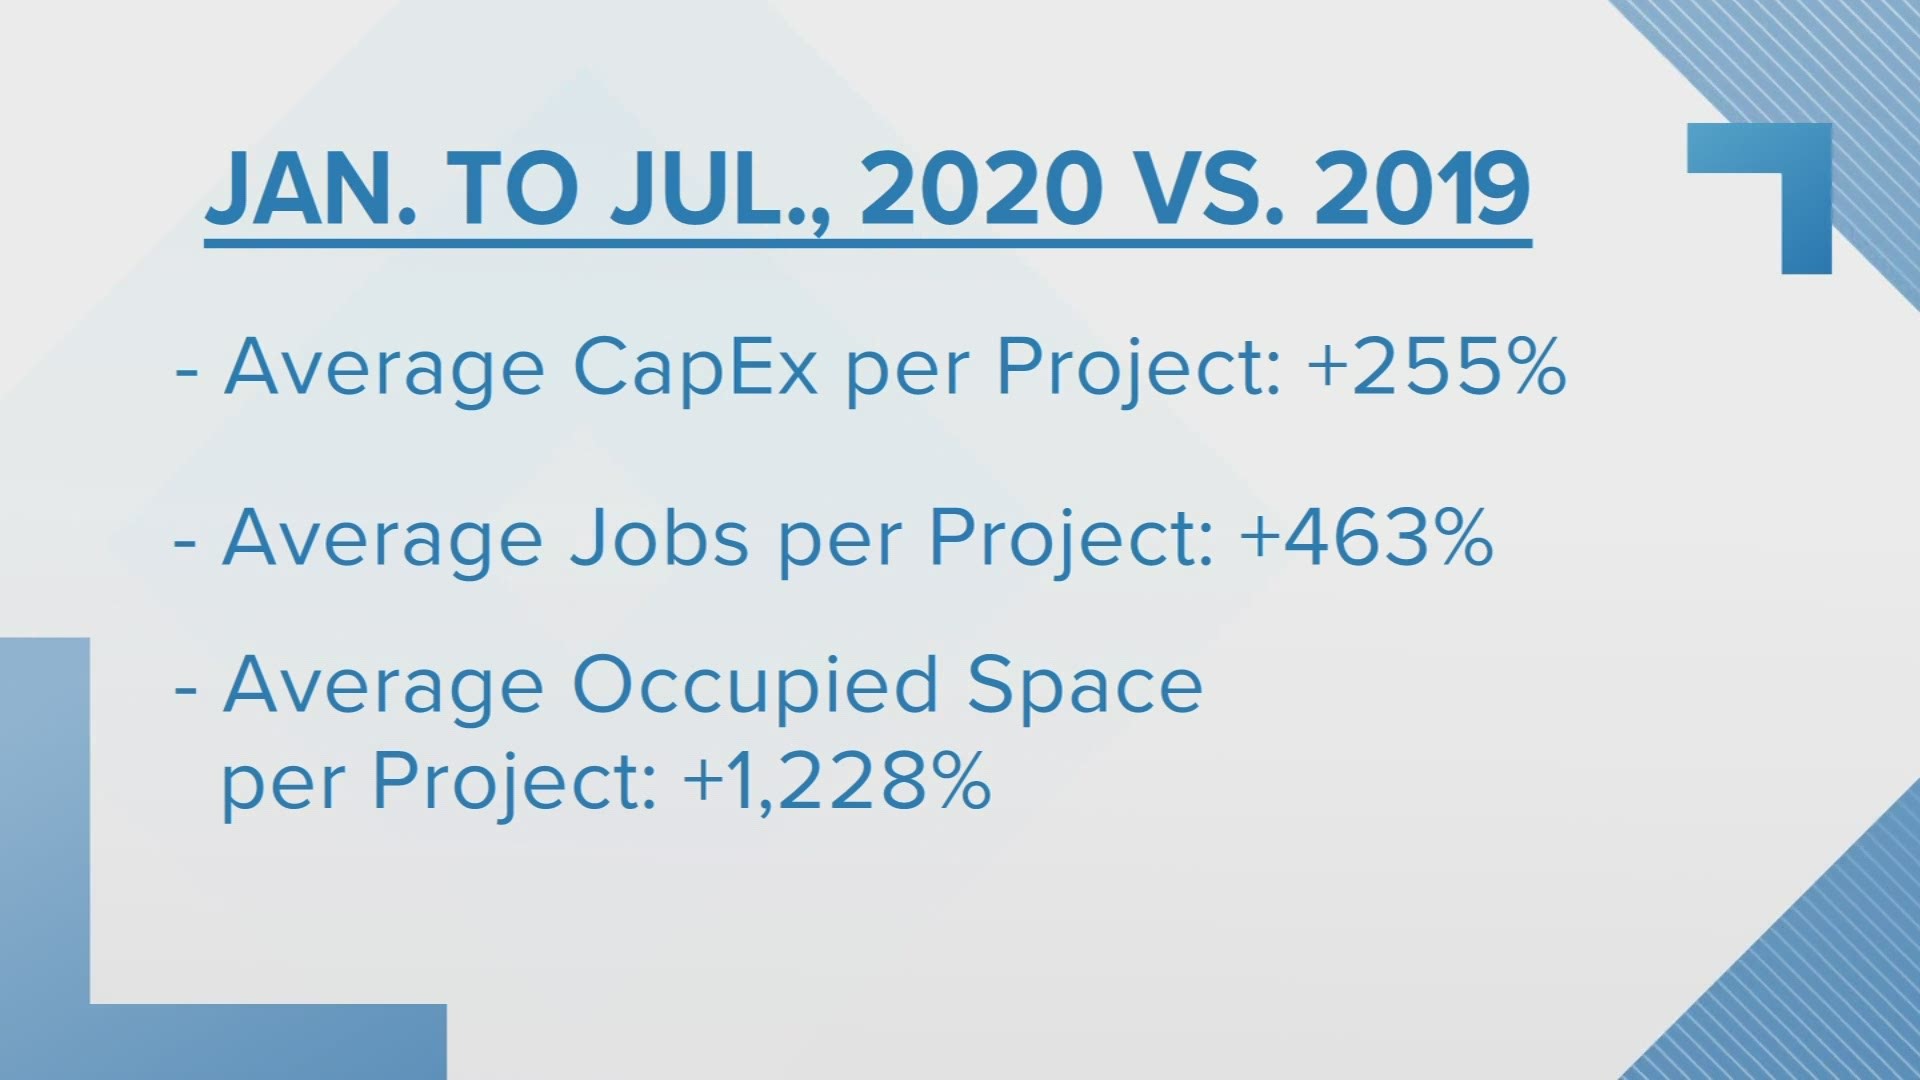 While the Brazos Valley has seen steady growth over the years, the Brazos Valley Economic Development Corporation hasn't seen numbers like this.